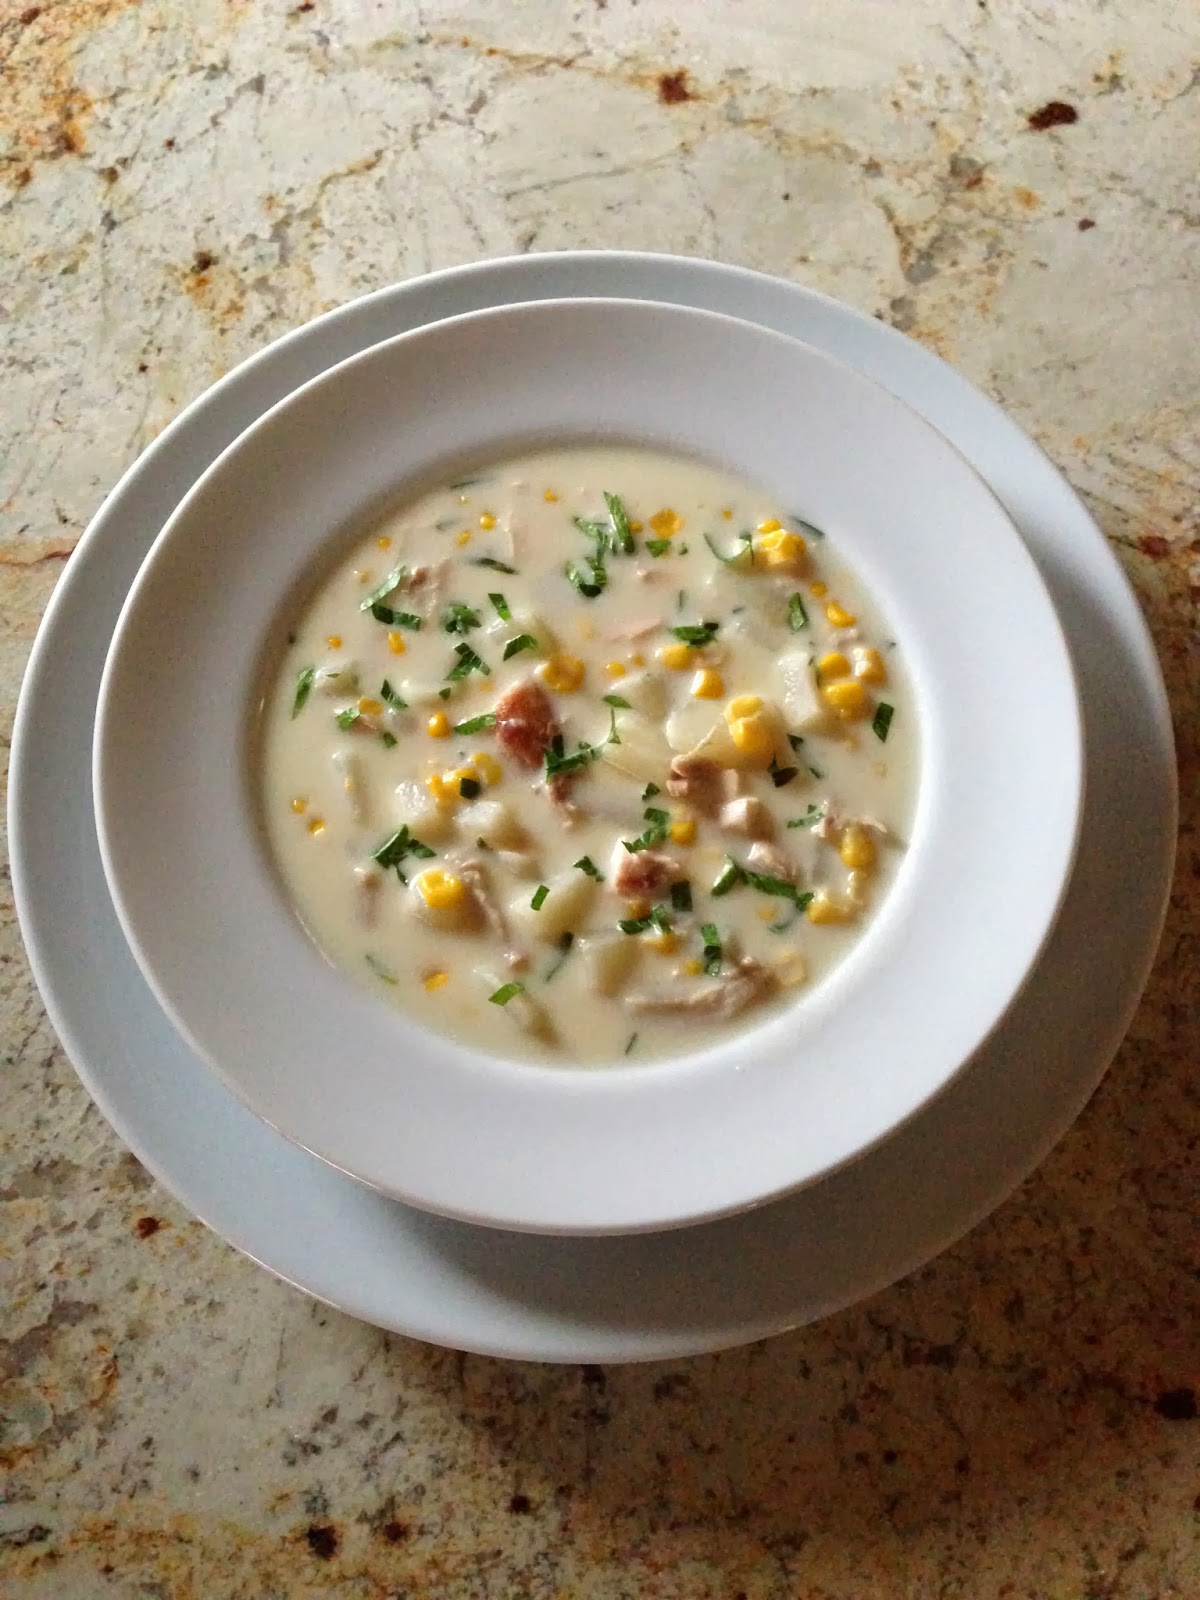 My Most Requested Recipes: Chicken Corn Chowder